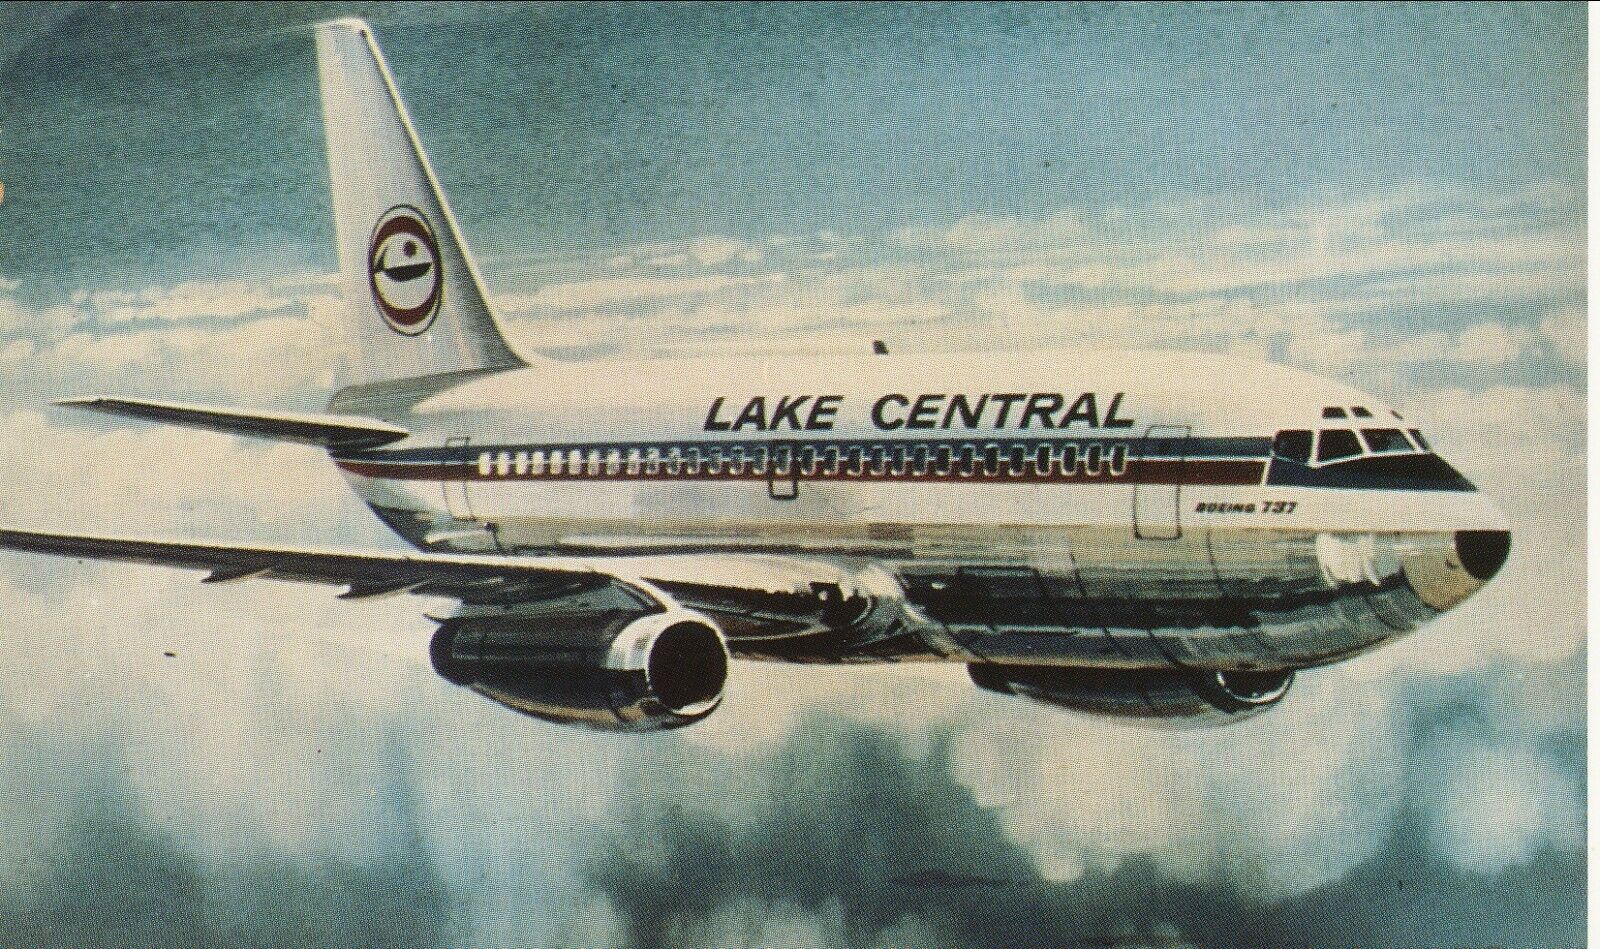 LAKE CENTRAL  AIRLINES B-737-100  PLANES SOLD TO LUFTHANSA / USAIR  / AMERICAN